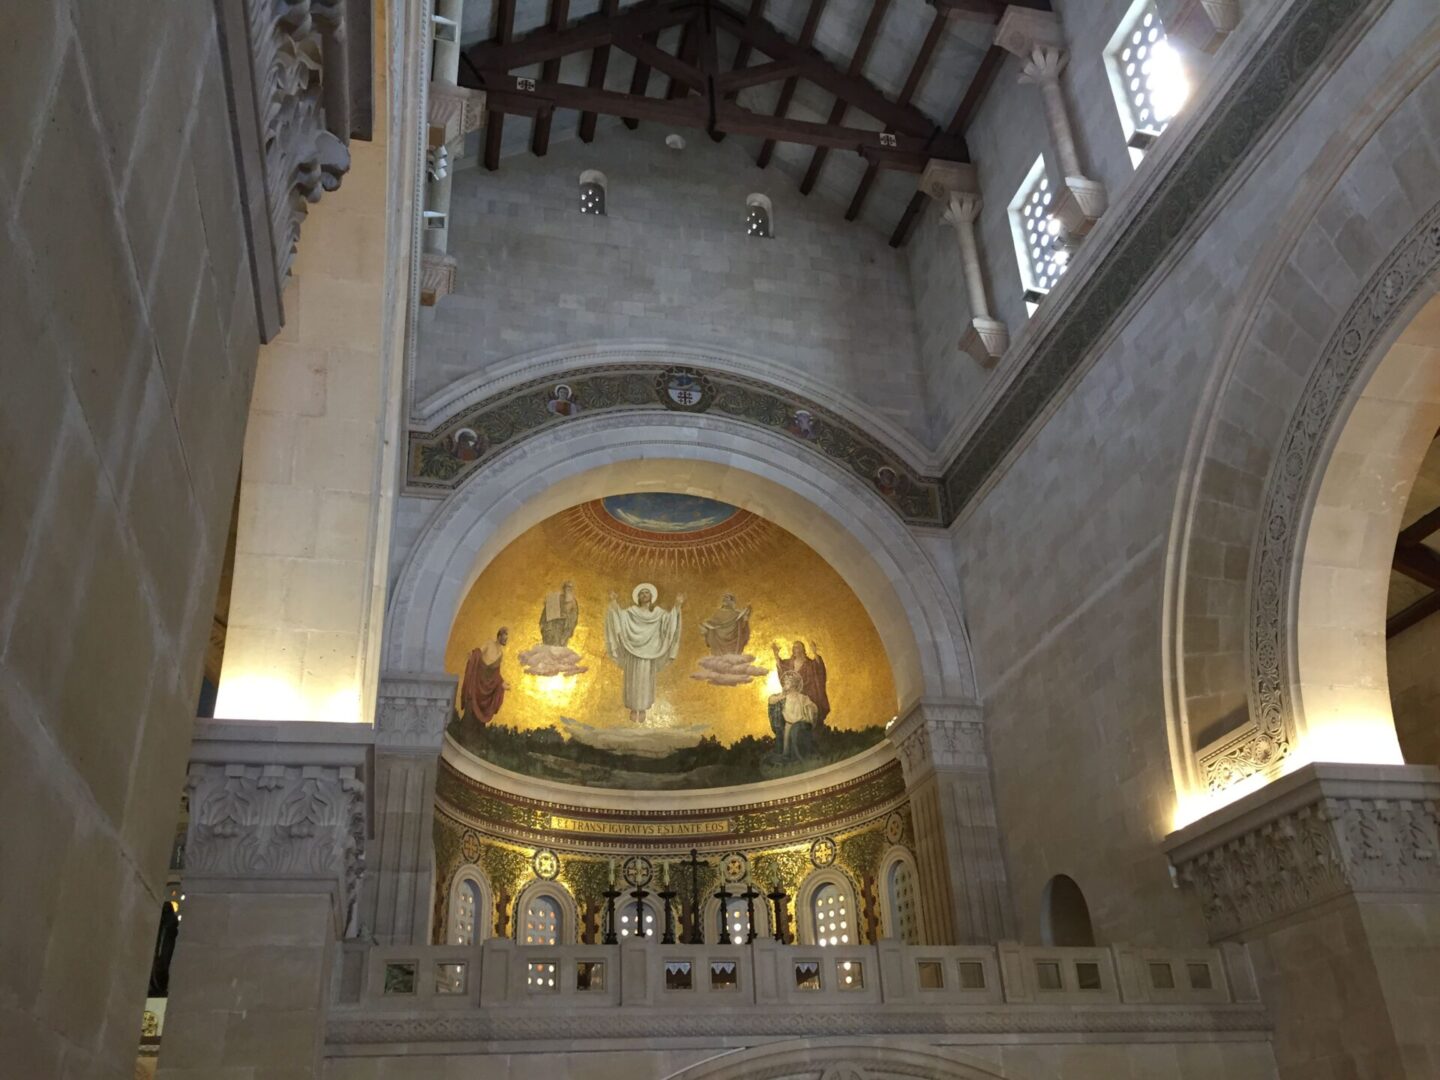 Inside view of the church building with jesus painting